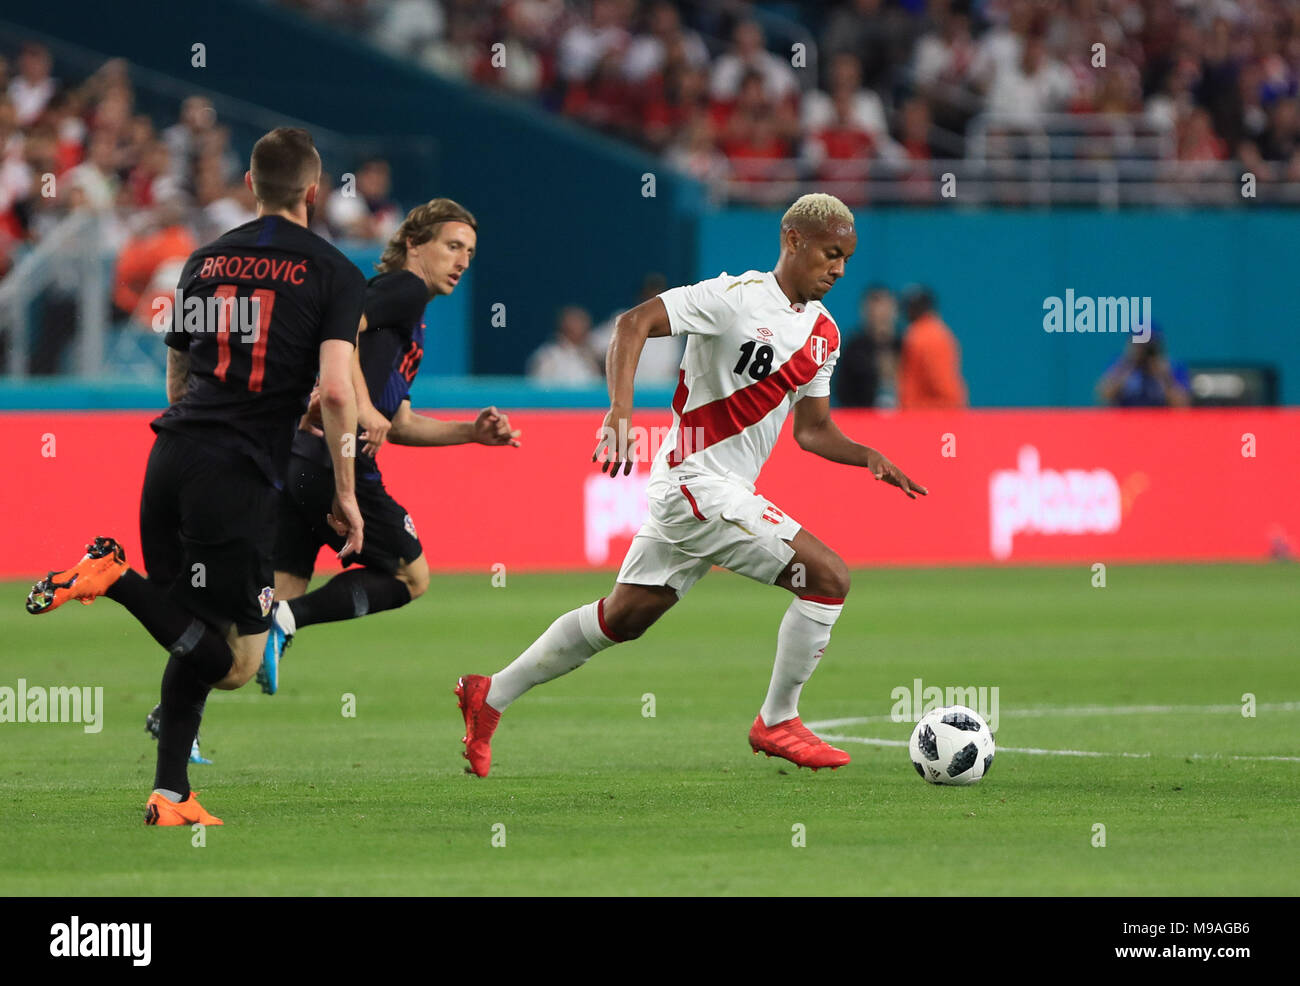 Miami Gardens, Florida, USA. 23rd Mar, 2018. Peru forward Andre Carrillo (18) in action during a FIFA World Cup 2018 preparation match between the Peru National Soccer Team and the Croatia National Soccer Team at the Hard Rock Stadium in Miami Gardens, Florida. Credit: Mario Houben/ZUMA Wire/Alamy Live News Stock Photo